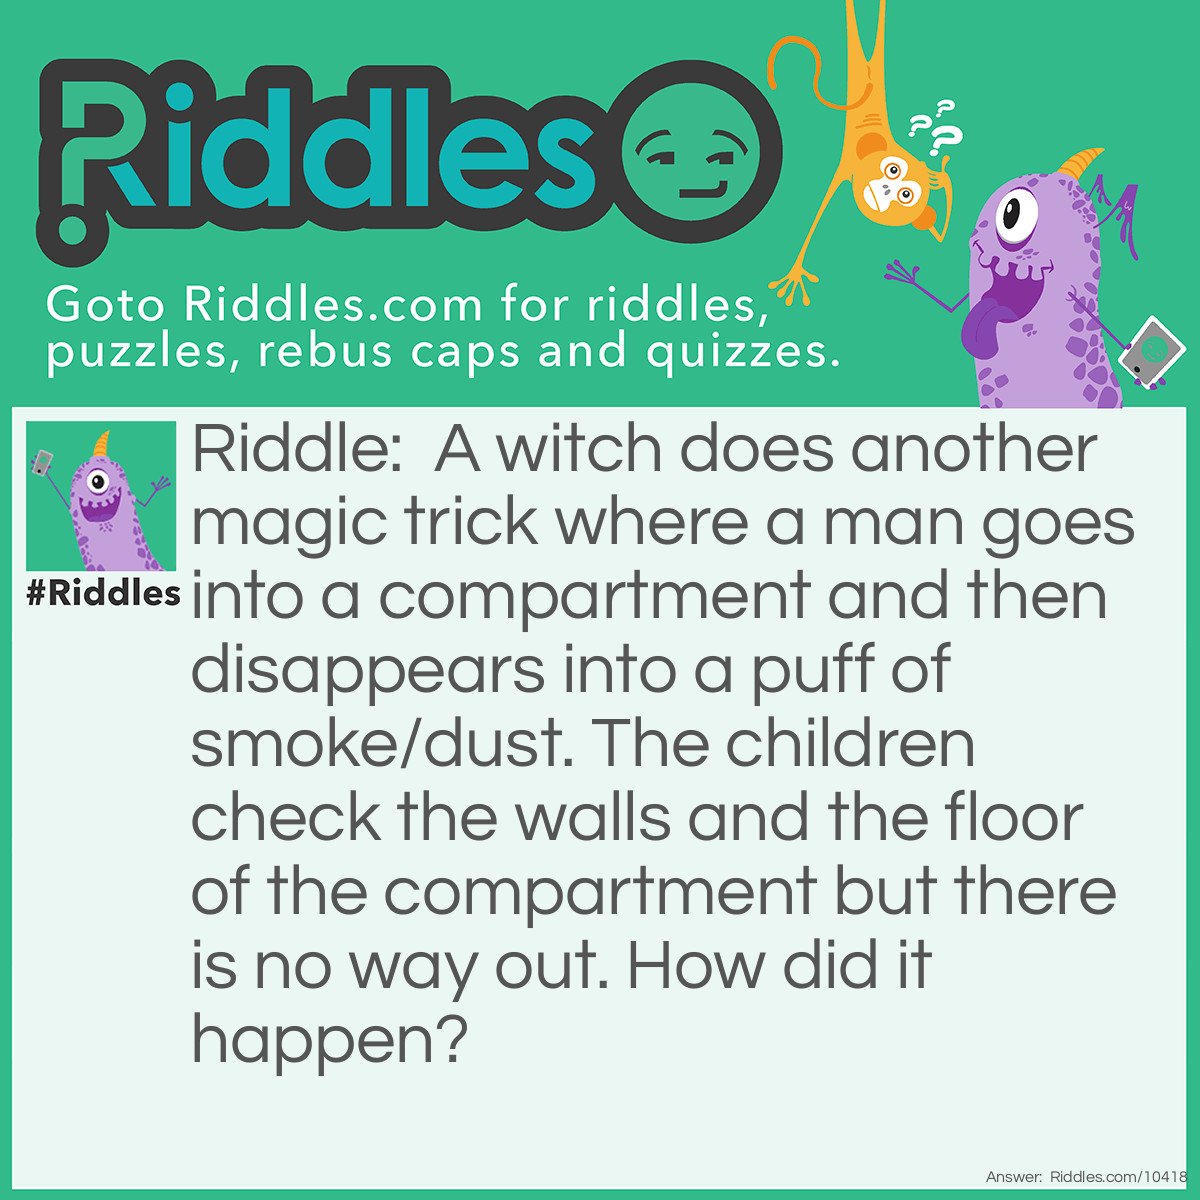 Riddle: A witch does another magic trick where a man goes into a compartment and then disappears into a puff of smoke/dust. The children check the walls and the floor of the compartment but there is no way out. How did it happen? Answer: The witch turned the man into one of the children so when the children went into the compartment to check they didn't notice that the man was right there (also the witch is lazy so she didn't clean the compartment and that's where the dust came from) (This was worked out by my friend and my friends friend)